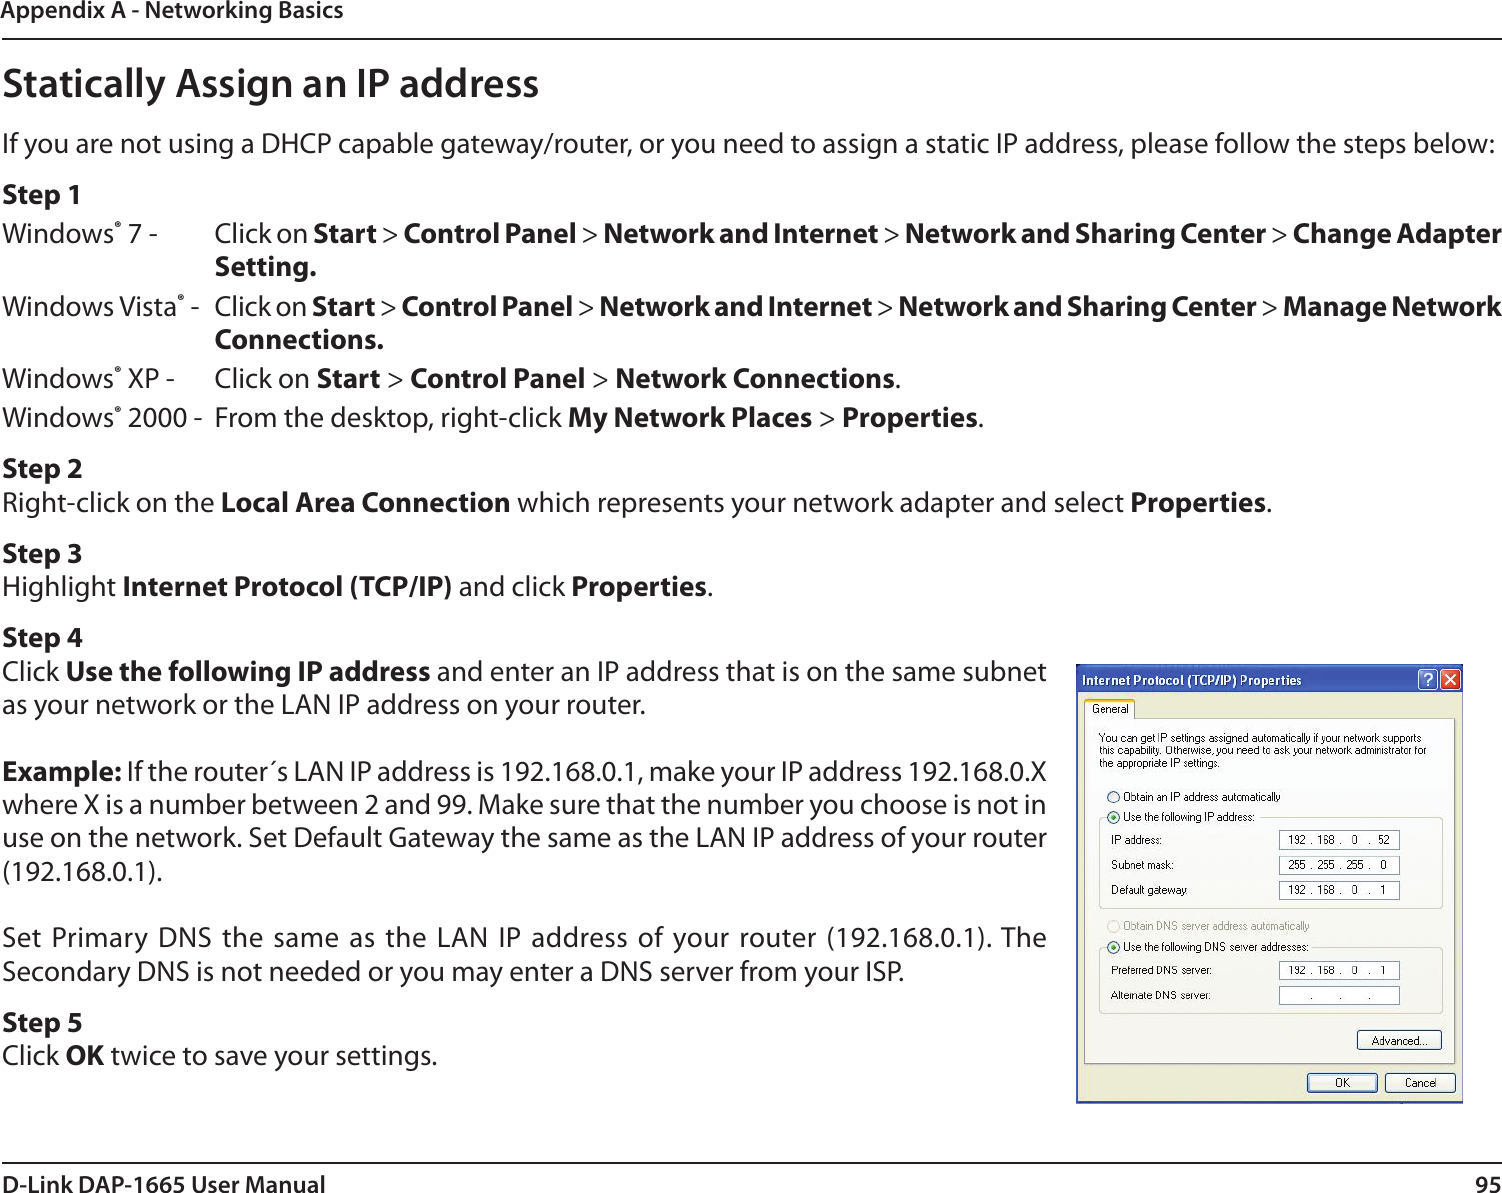 95D-Link DAP-1665 User ManualAppendix A - Networking BasicsStatically Assign an IP addressIf you are not using a DHCP capable gateway/router, or you need to assign a static IP address, please follow the steps below:Step 1Windows® 7 -  Click on Start &gt; Control Panel &gt; Network and Internet &gt; Network and Sharing Center &gt; Change Adapter Setting. Windows Vista® -  Click on Start &gt; Control Panel &gt; Network and Internet &gt; Network and Sharing Center &gt; Manage Network Connections.Windows® XP -  Click on Start &gt; Control Panel &gt; Network Connections.Windows® 2000 -  From the desktop, right-click My Network Places &gt; Properties.Step 2Right-click on the Local Area Connection which represents your network adapter and select Properties.Step 3Highlight Internet Protocol (TCP/IP) and click Properties.Step 4Click Use the following IP address and enter an IP address that is on the same subnet as your network or the LAN IP address on your router.Example: If the router´s LAN IP address is 192.168.0.1, make your IP address 192.168.0.X where X is a number between 2 and 99. Make sure that the number you choose is not in use on the network. Set Default Gateway the same as the LAN IP address of your router (192.168.0.1). Set Primary DNS the same as the  LAN IP address of your router (192.168.0.1). The Secondary DNS is not needed or you may enter a DNS server from your ISP.Step 5Click OK twice to save your settings.